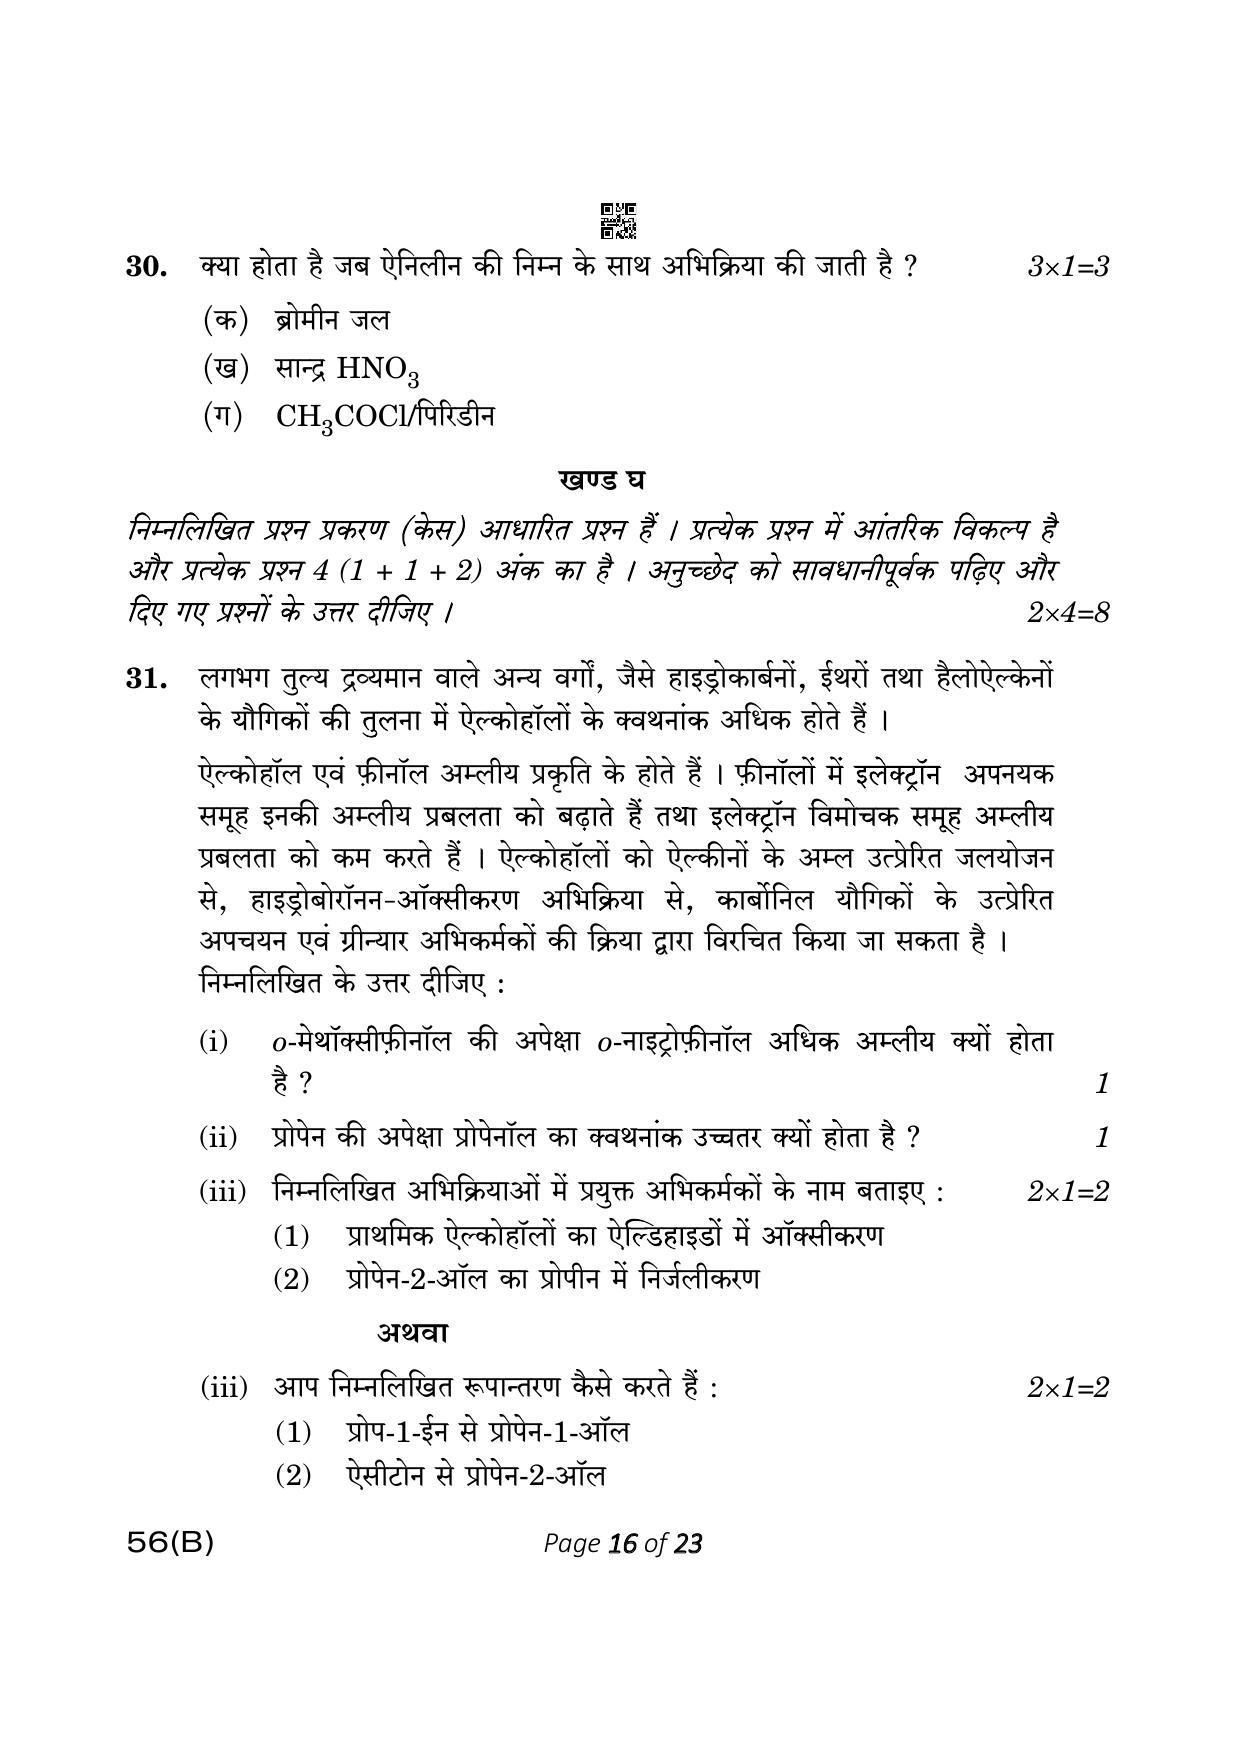 CBSE Class 12 56-B Chemistry 2023 (Compartment) Question Paper - Page 16